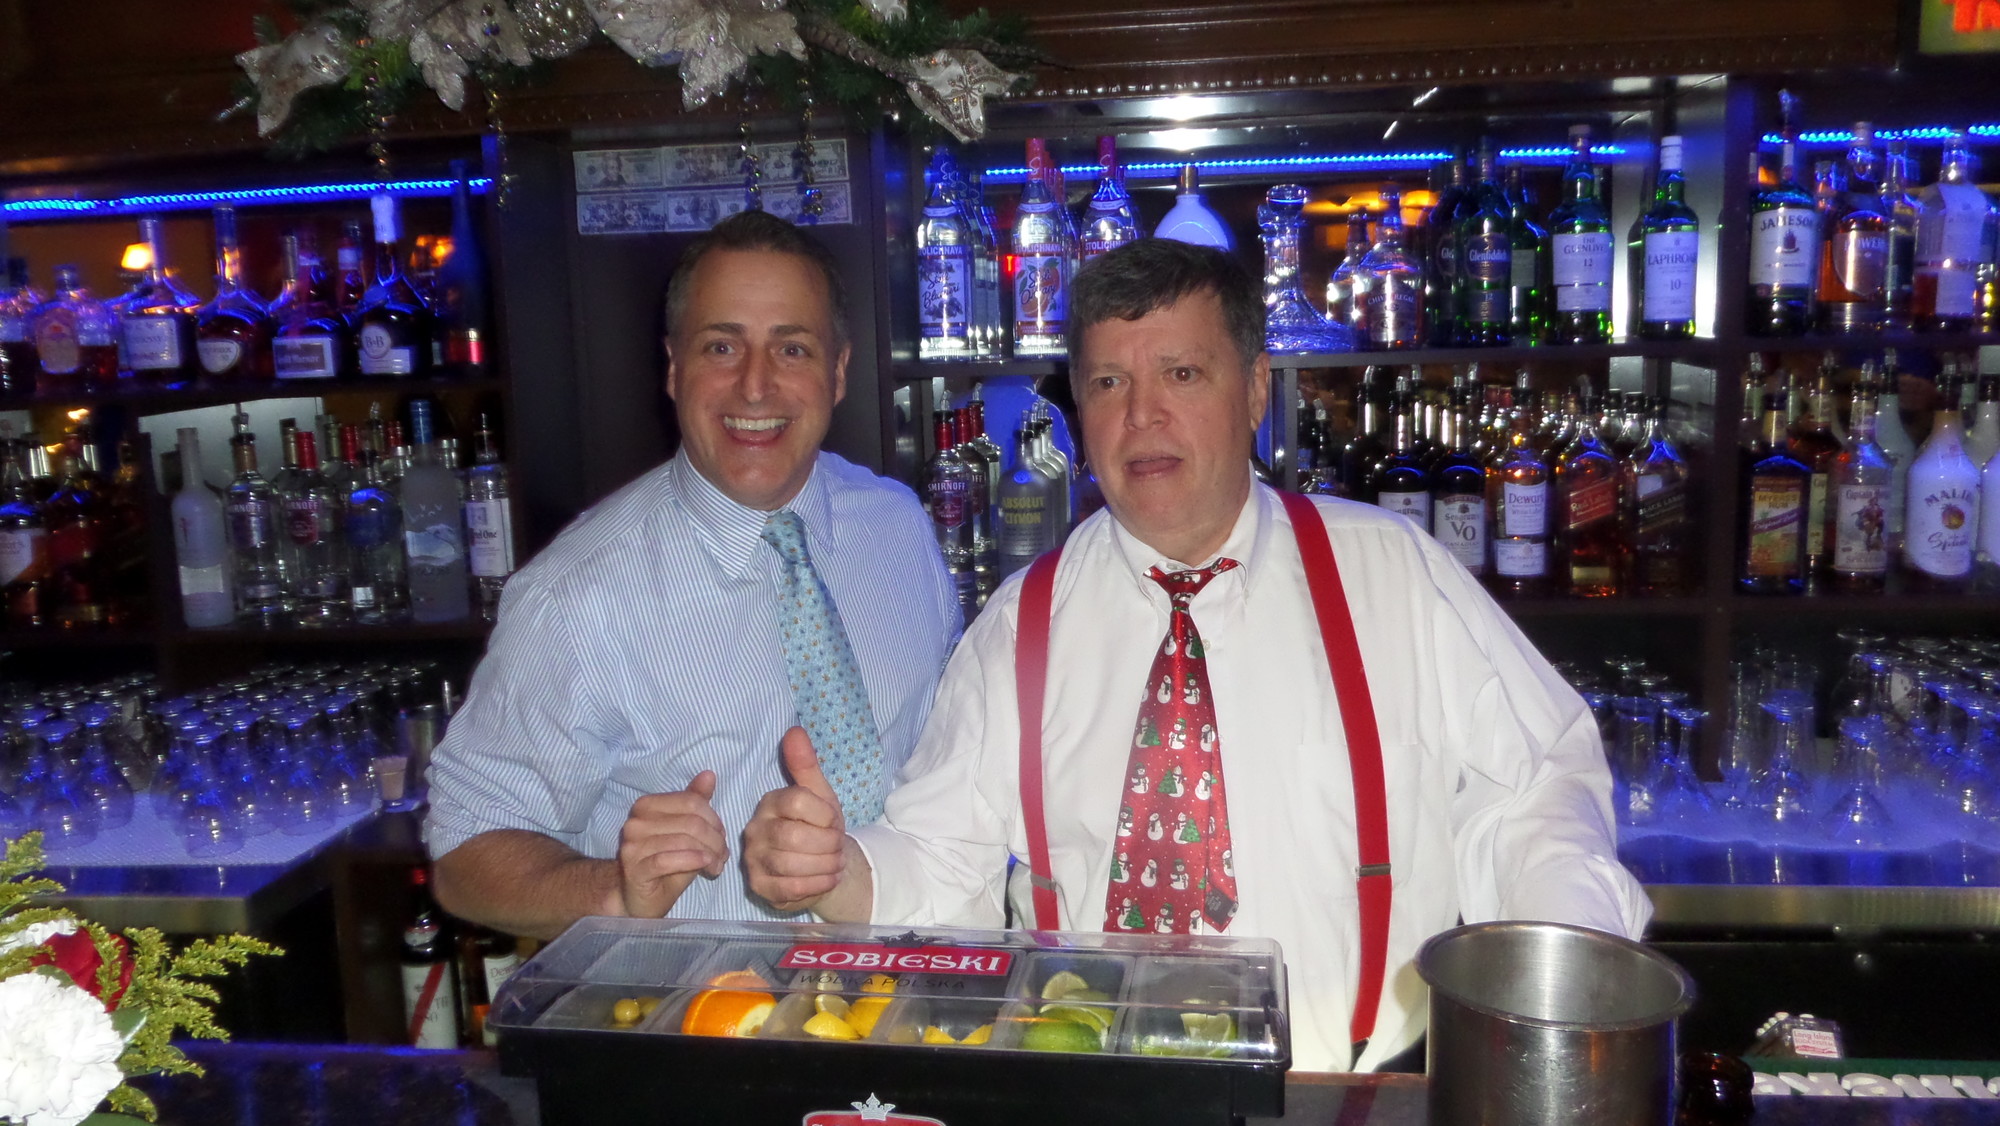 Assemblyman Brian Curran, left, and Lynbrook Mayor William Hendrick each claimed to be the one who raised the most tips for the evening.